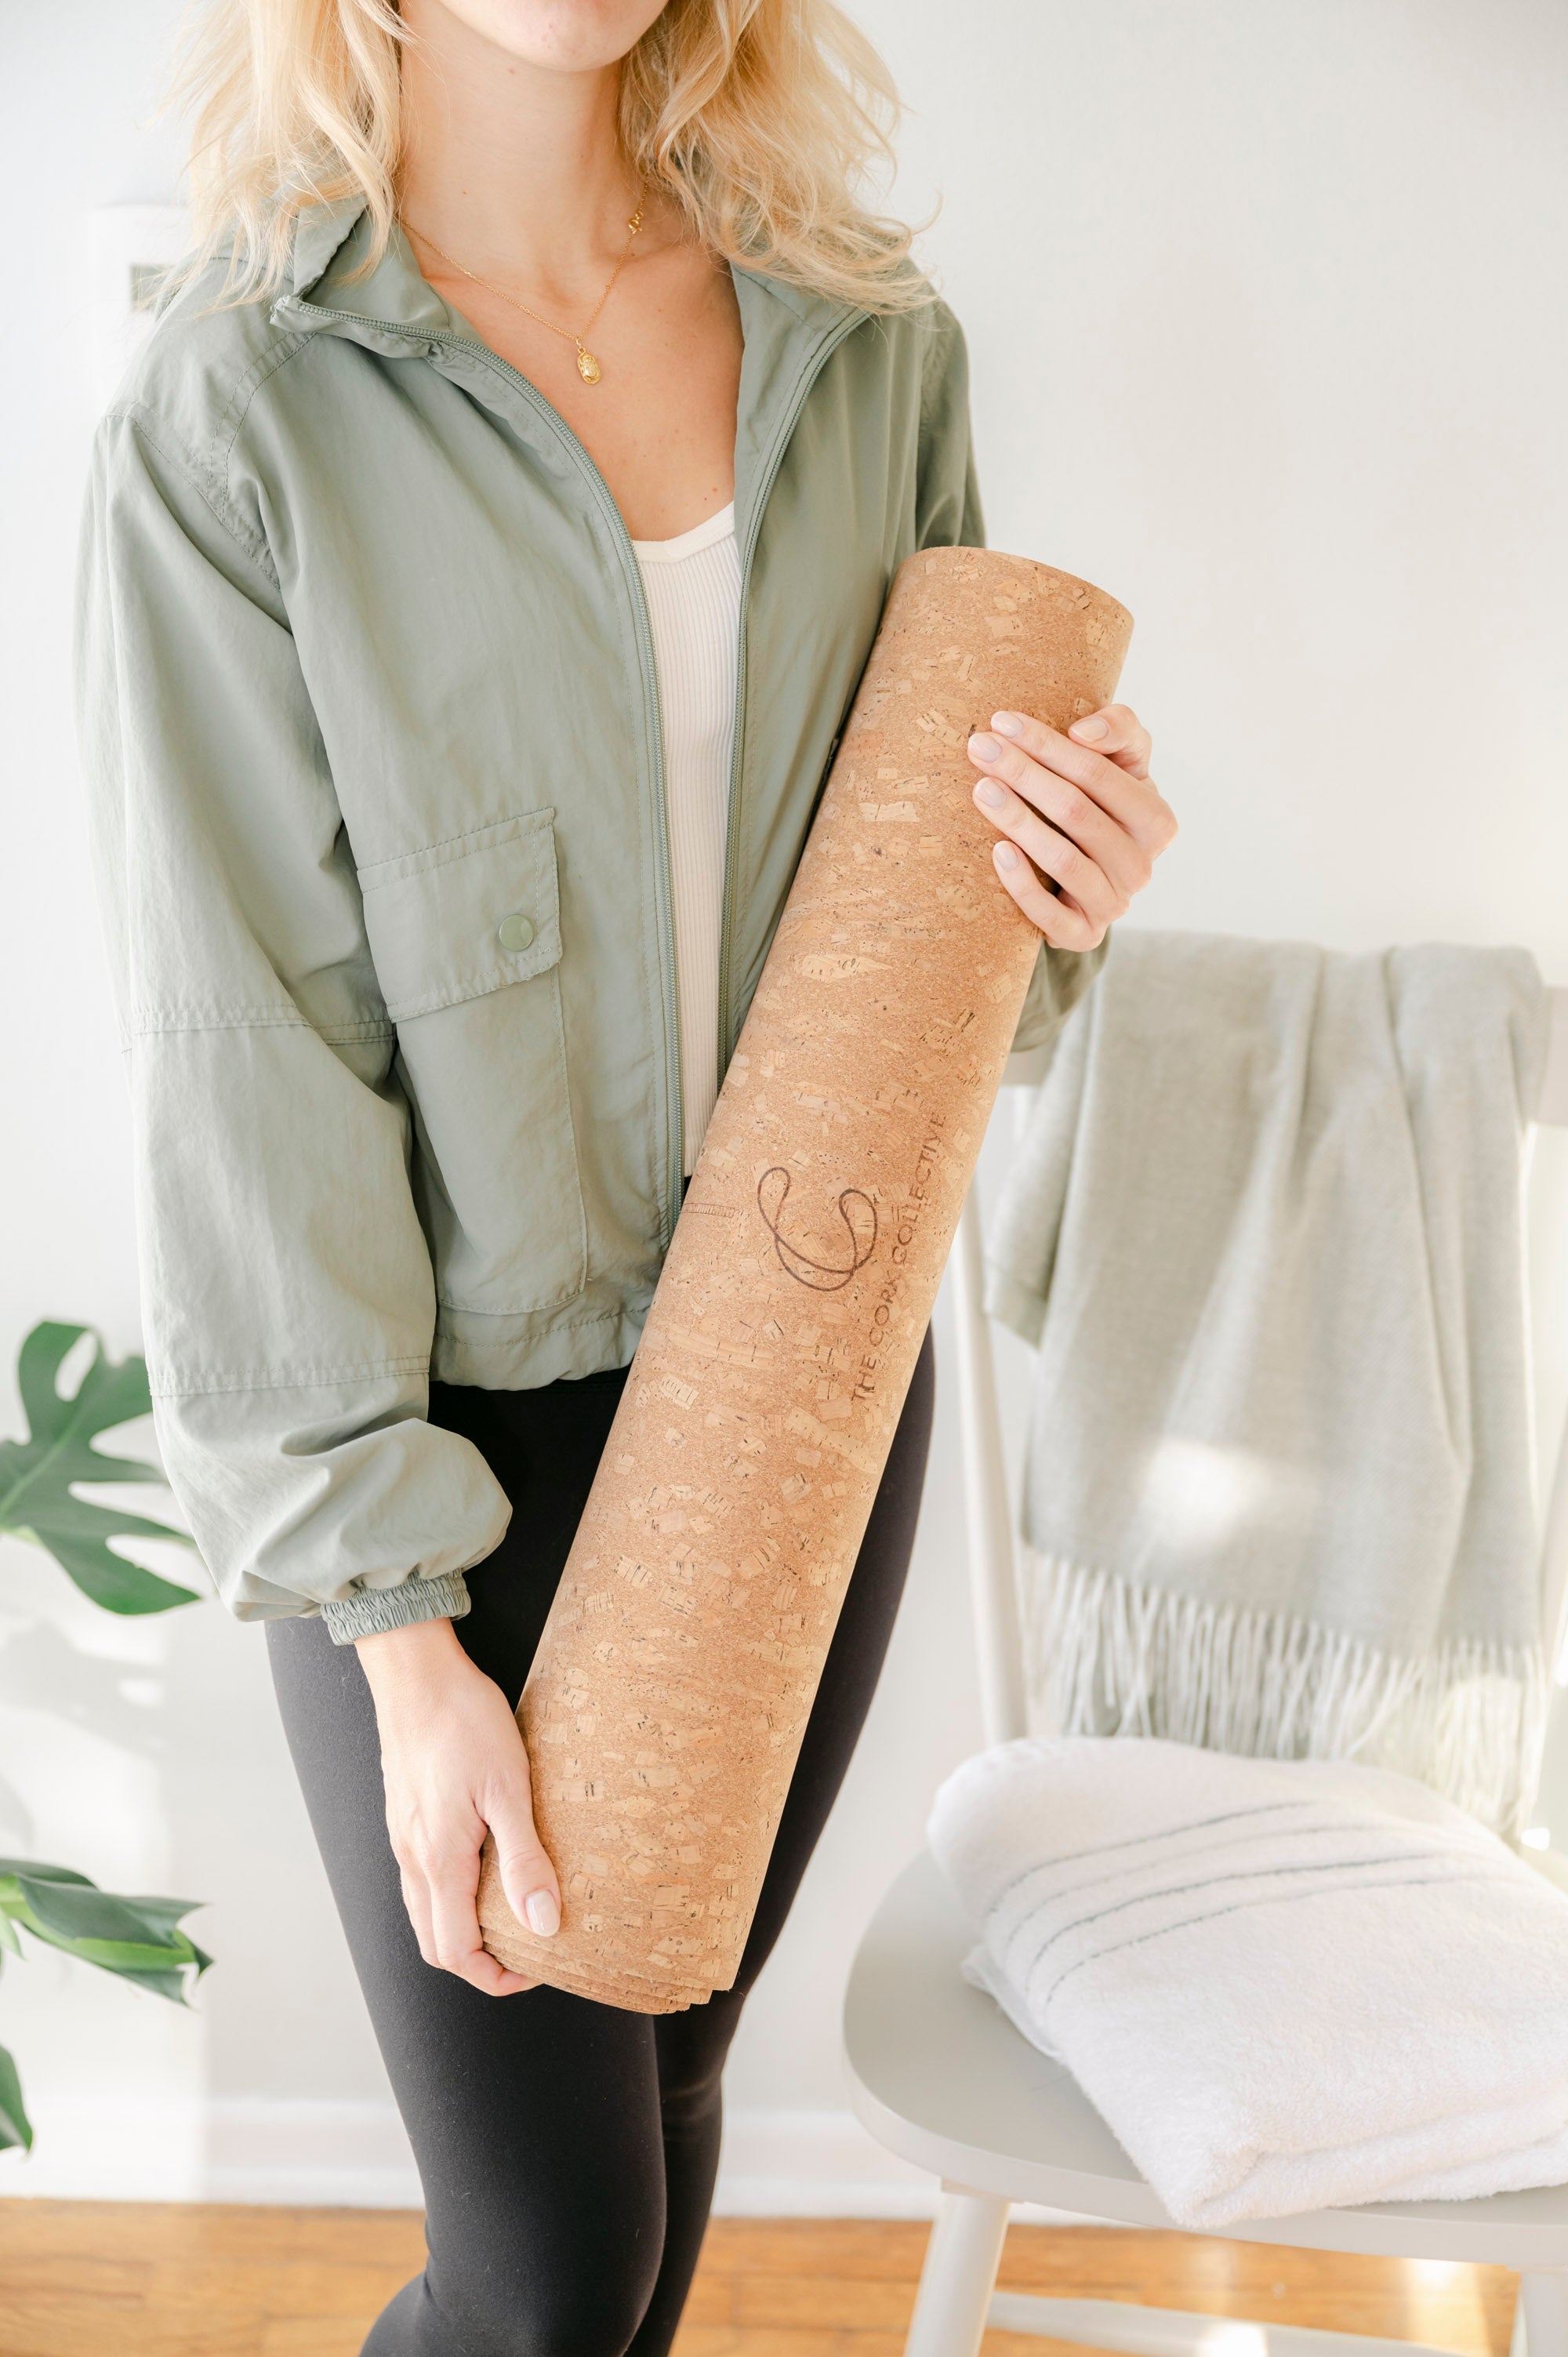 Finding Zen at Home: The Best Ways to Practice Yoga with a Cork Yoga Mat - Corkcollective